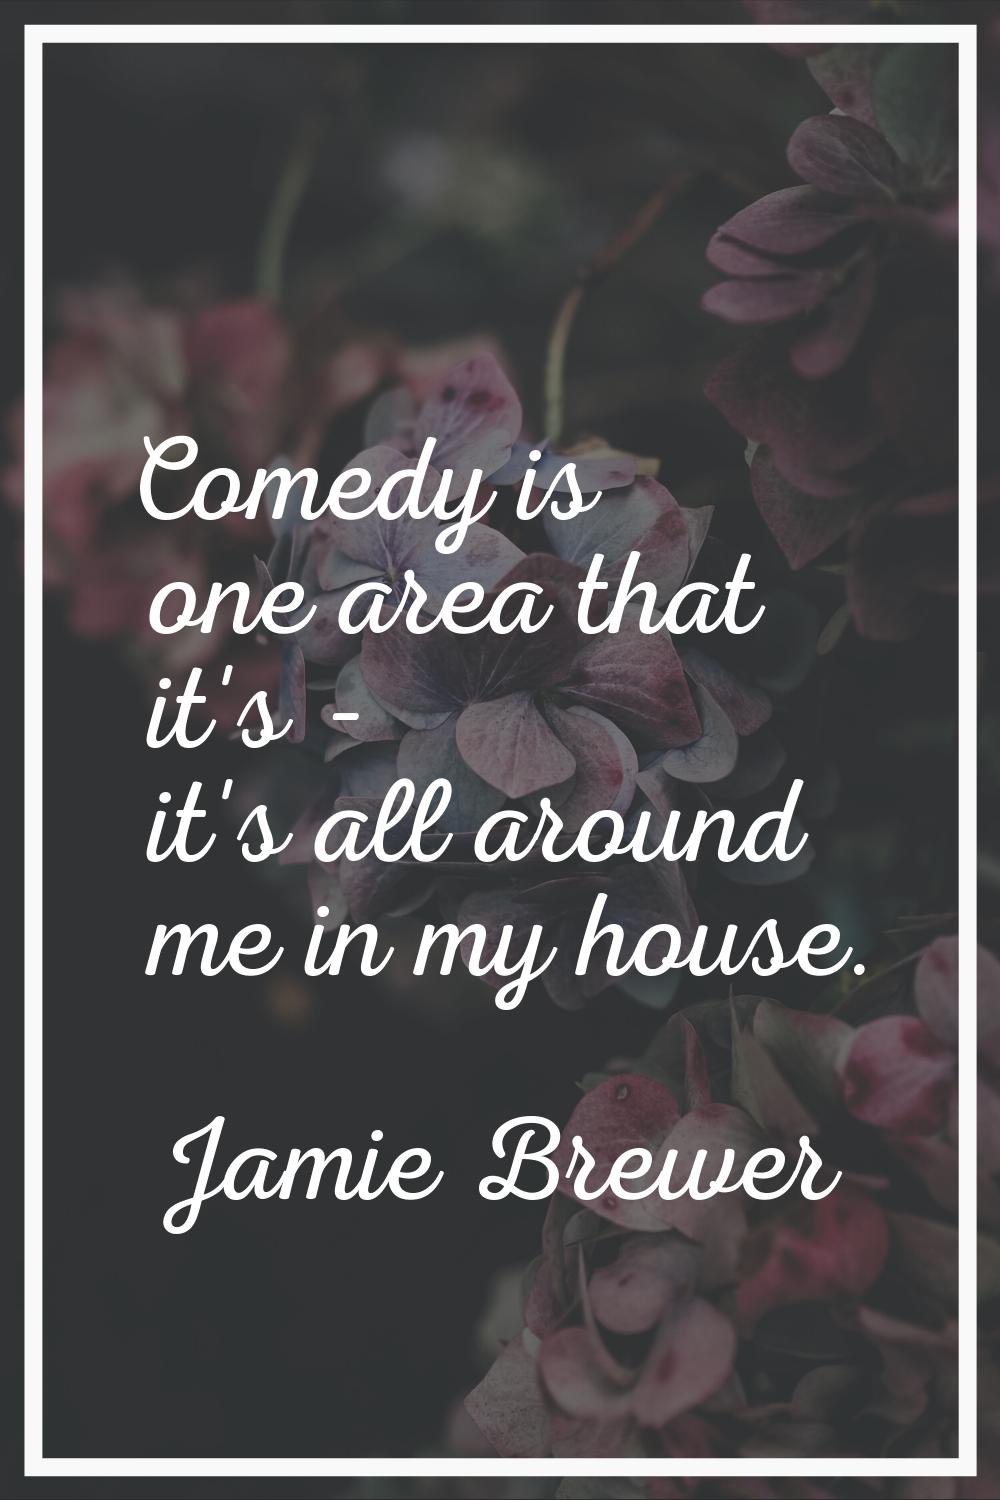 Comedy is one area that it's - it's all around me in my house.